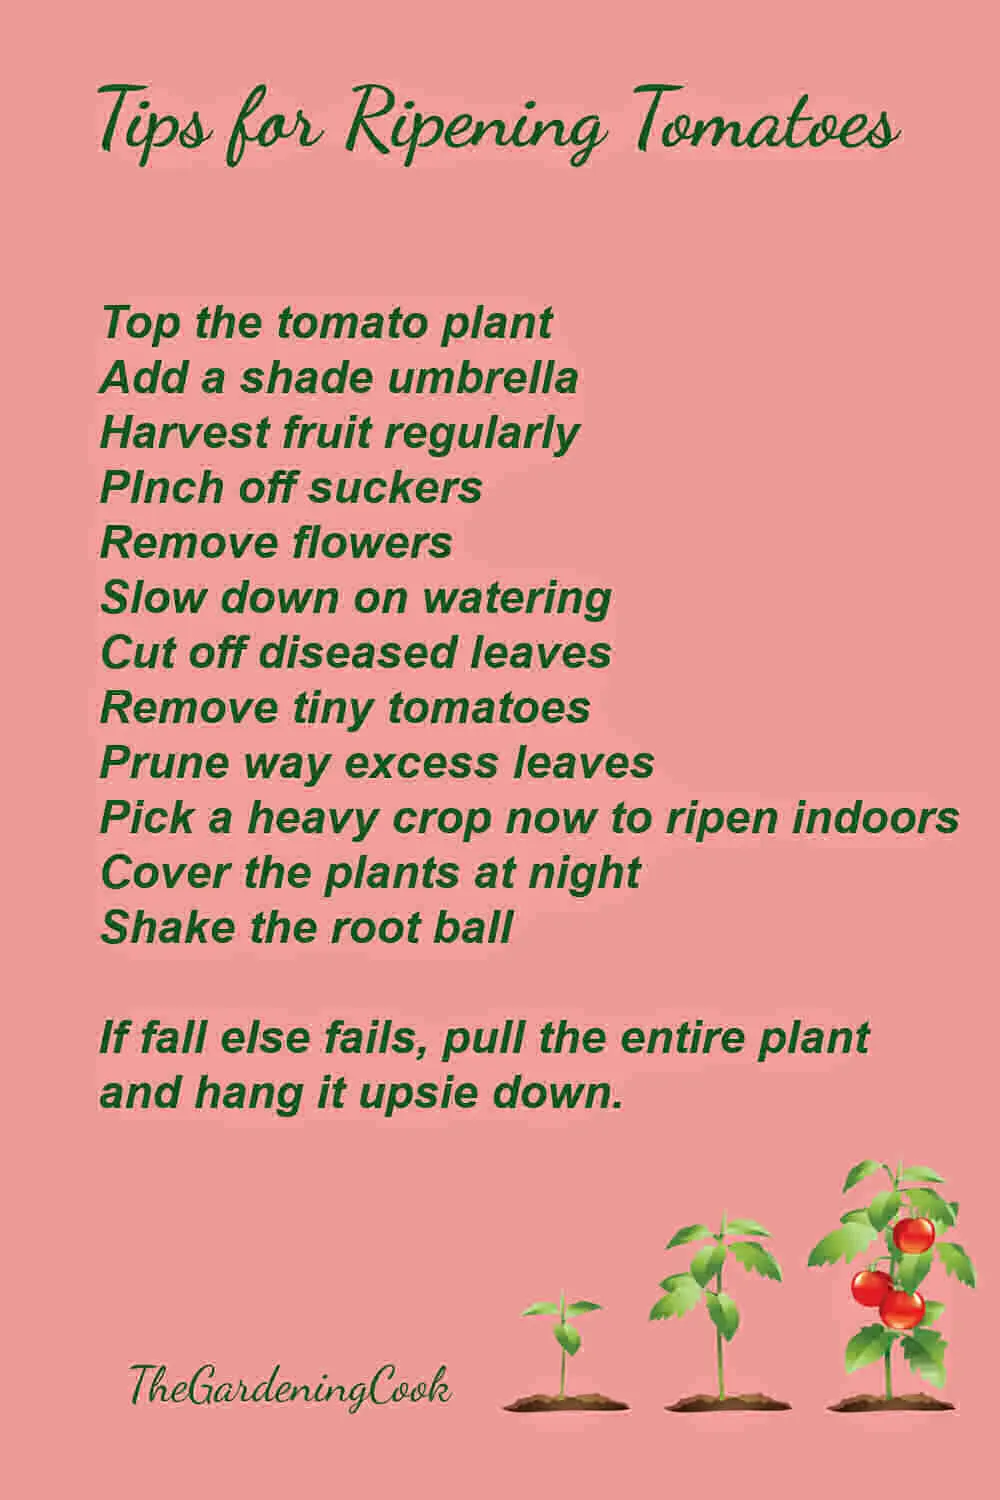 Printable with tips for ripening tomatoes on the vine.